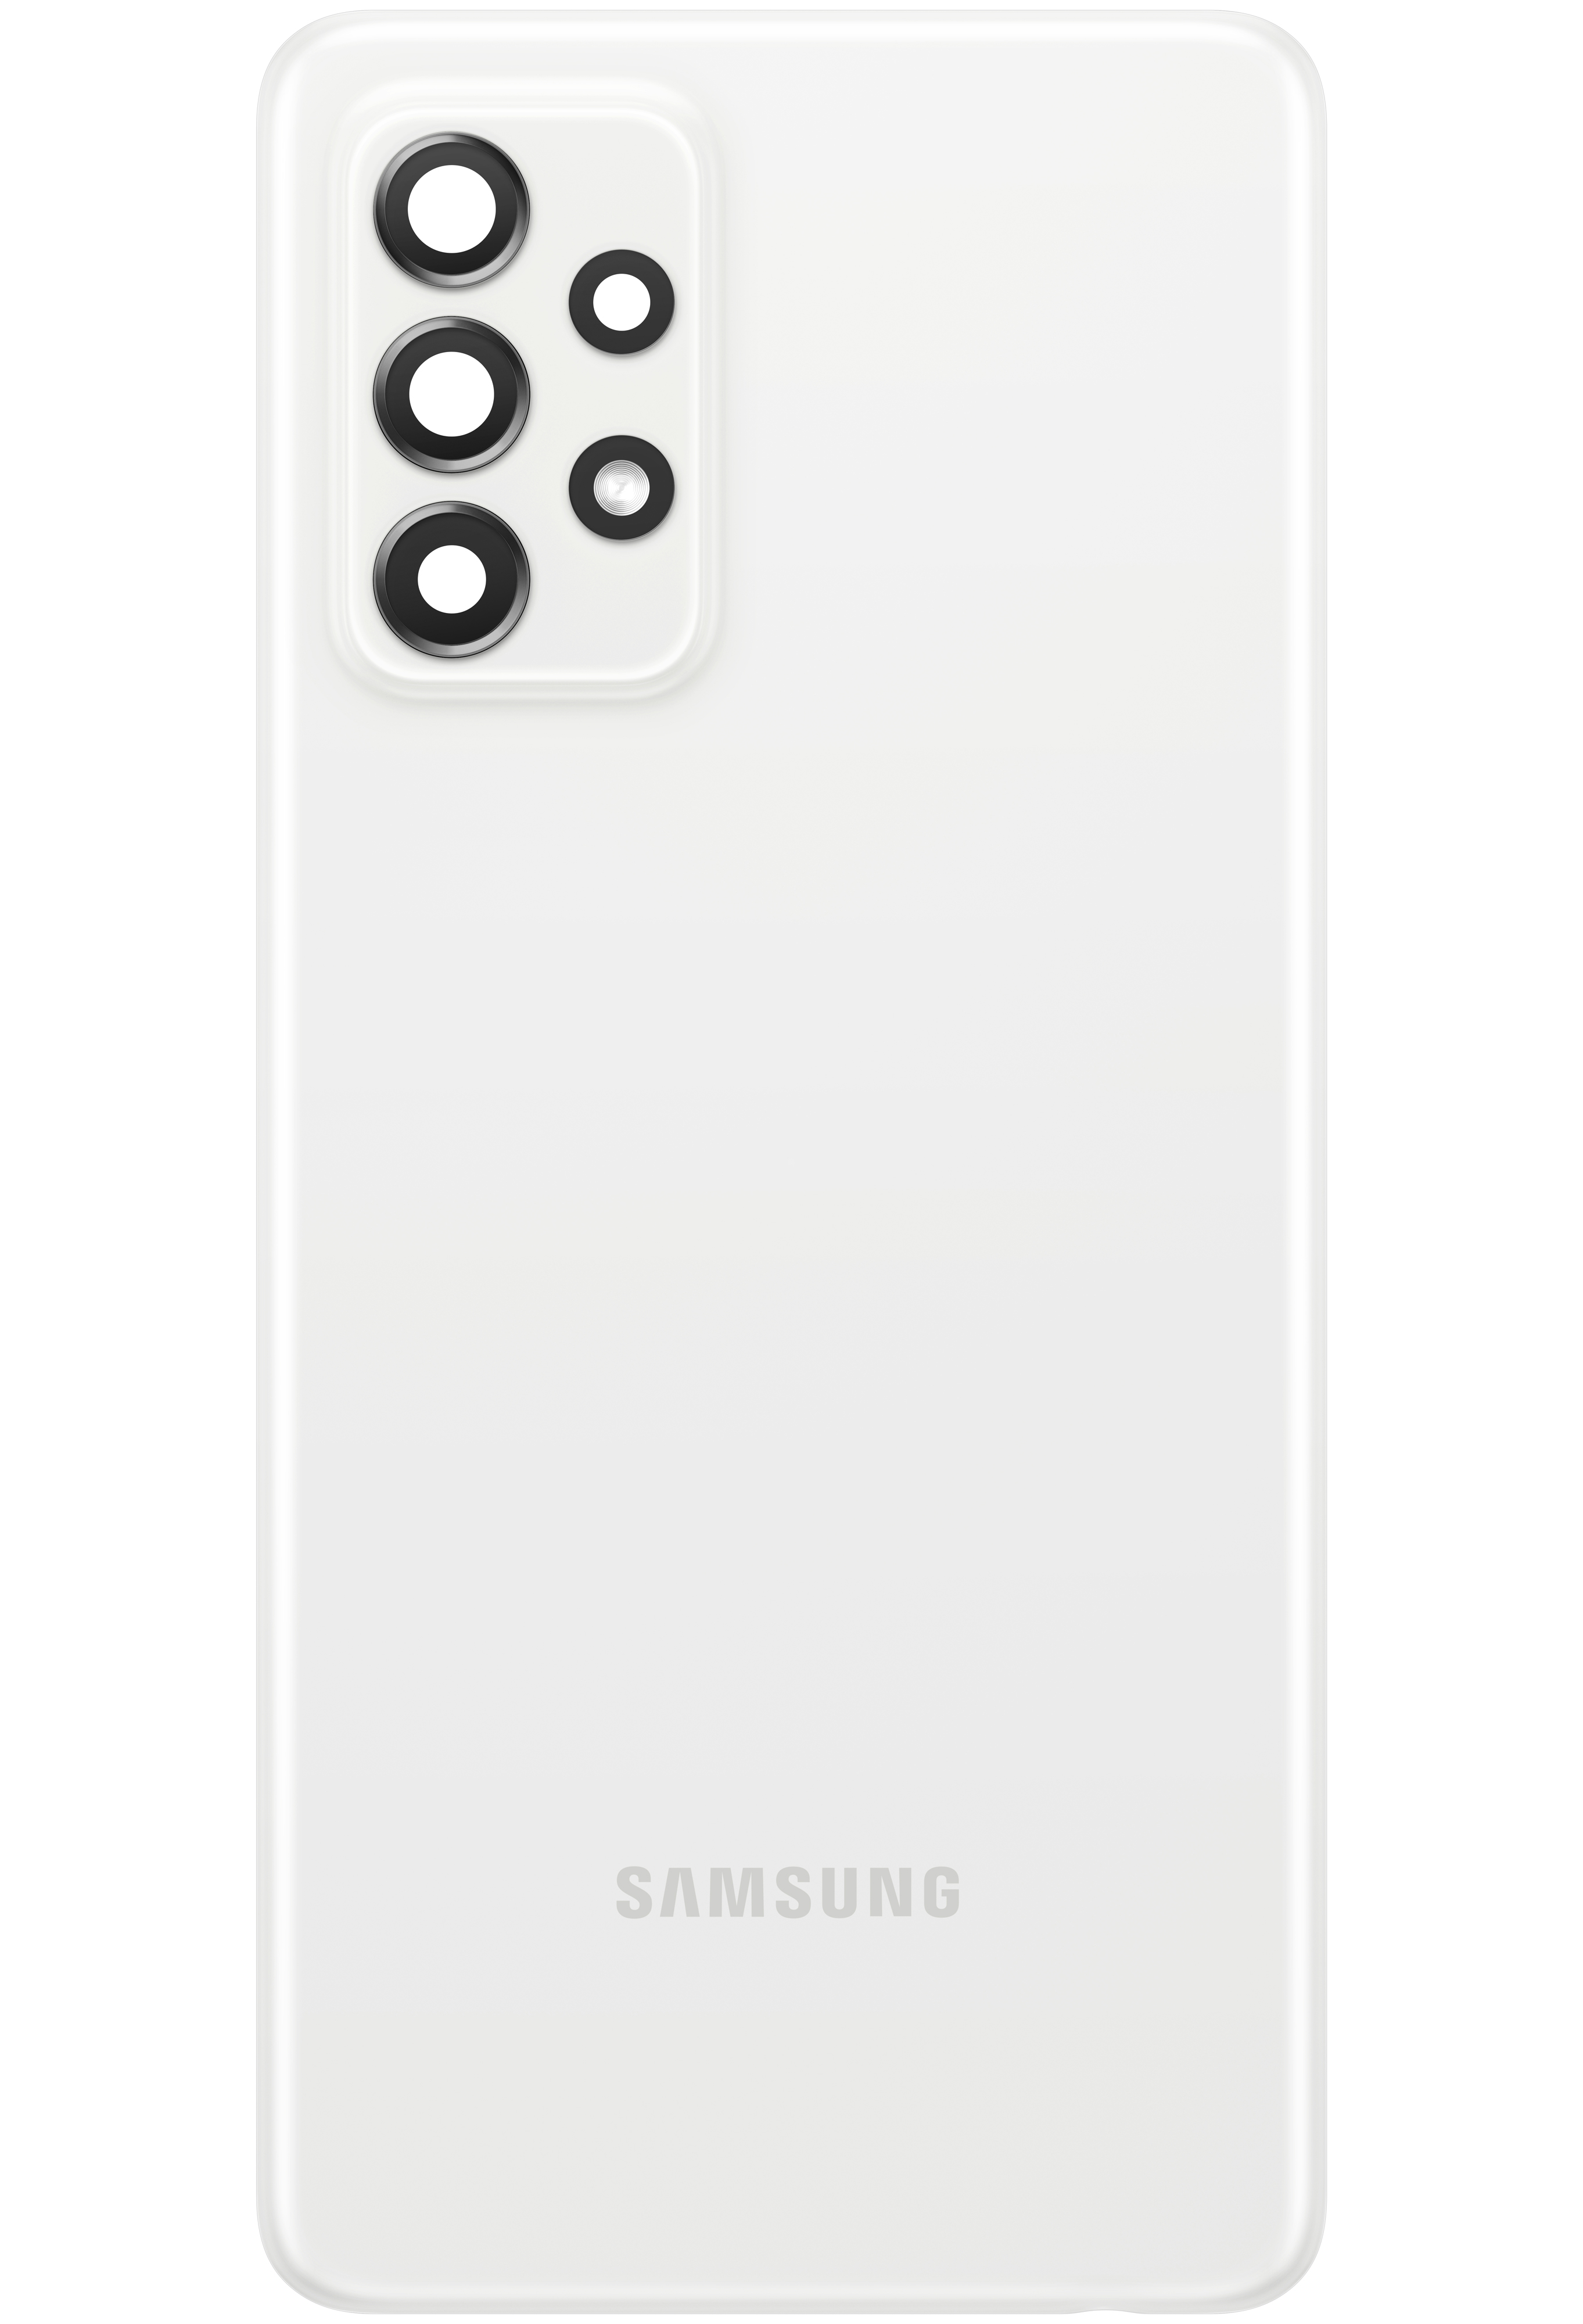 battery-cover-for-samsung-galaxy-a72-a725-awesome-white-gh82-25448d